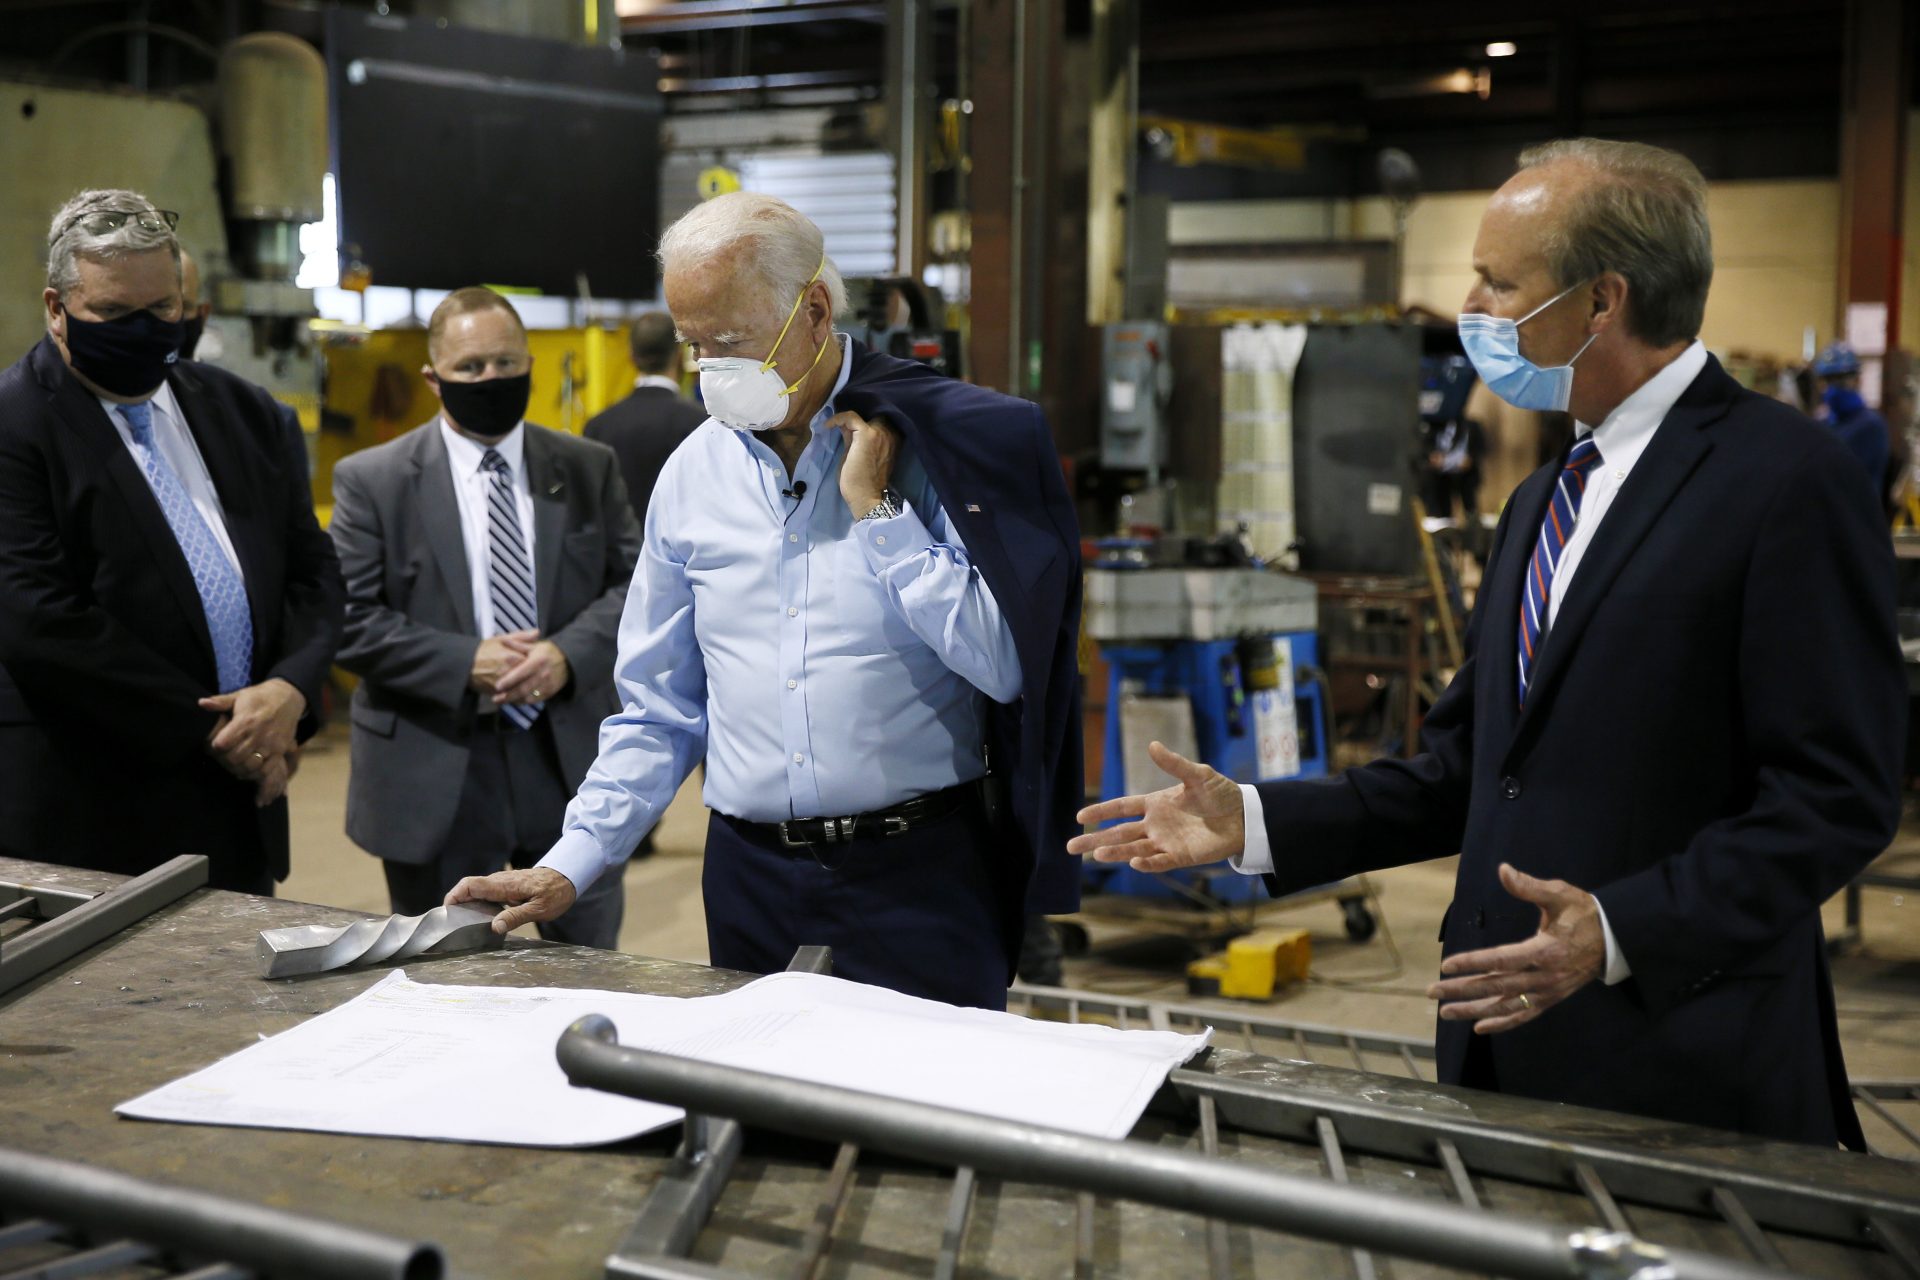 Democratic presidential candidate, former Vice President Joe Biden, center, listens to McGregor Industries owner Bob McGregor, right, give a tour of the metal fabricating facility, Thursday, July 9, 2020, in Dunmore, Pa.